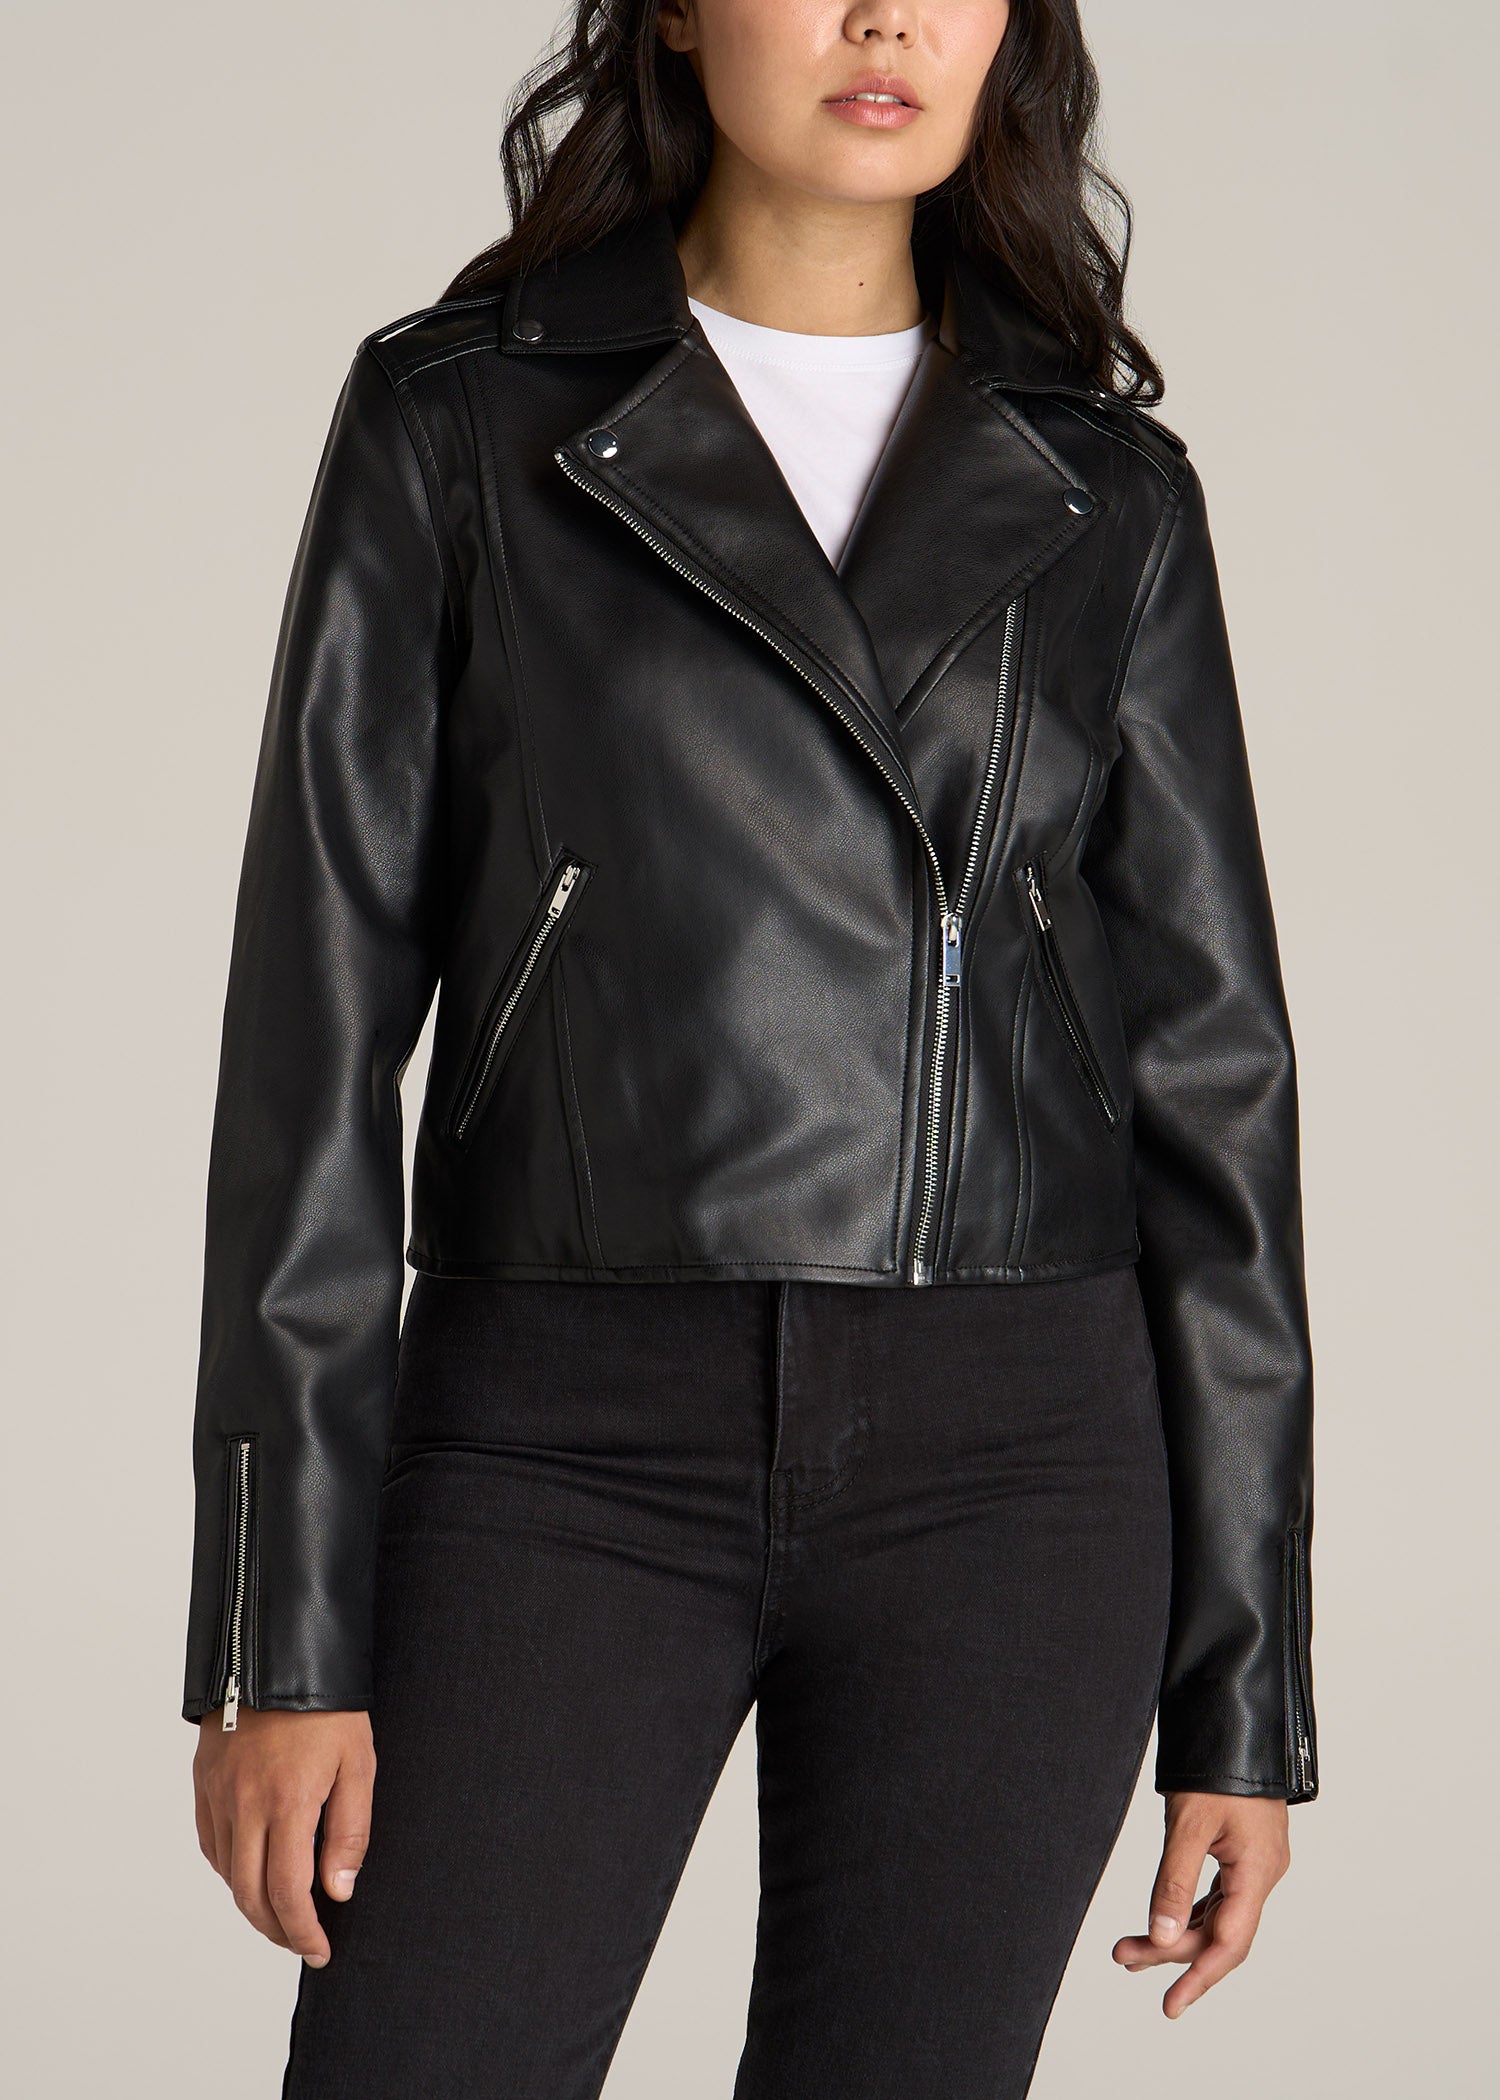 A tall woman wearing American Tall's Faux Leather Moto Jacket for Tall Women in Black.